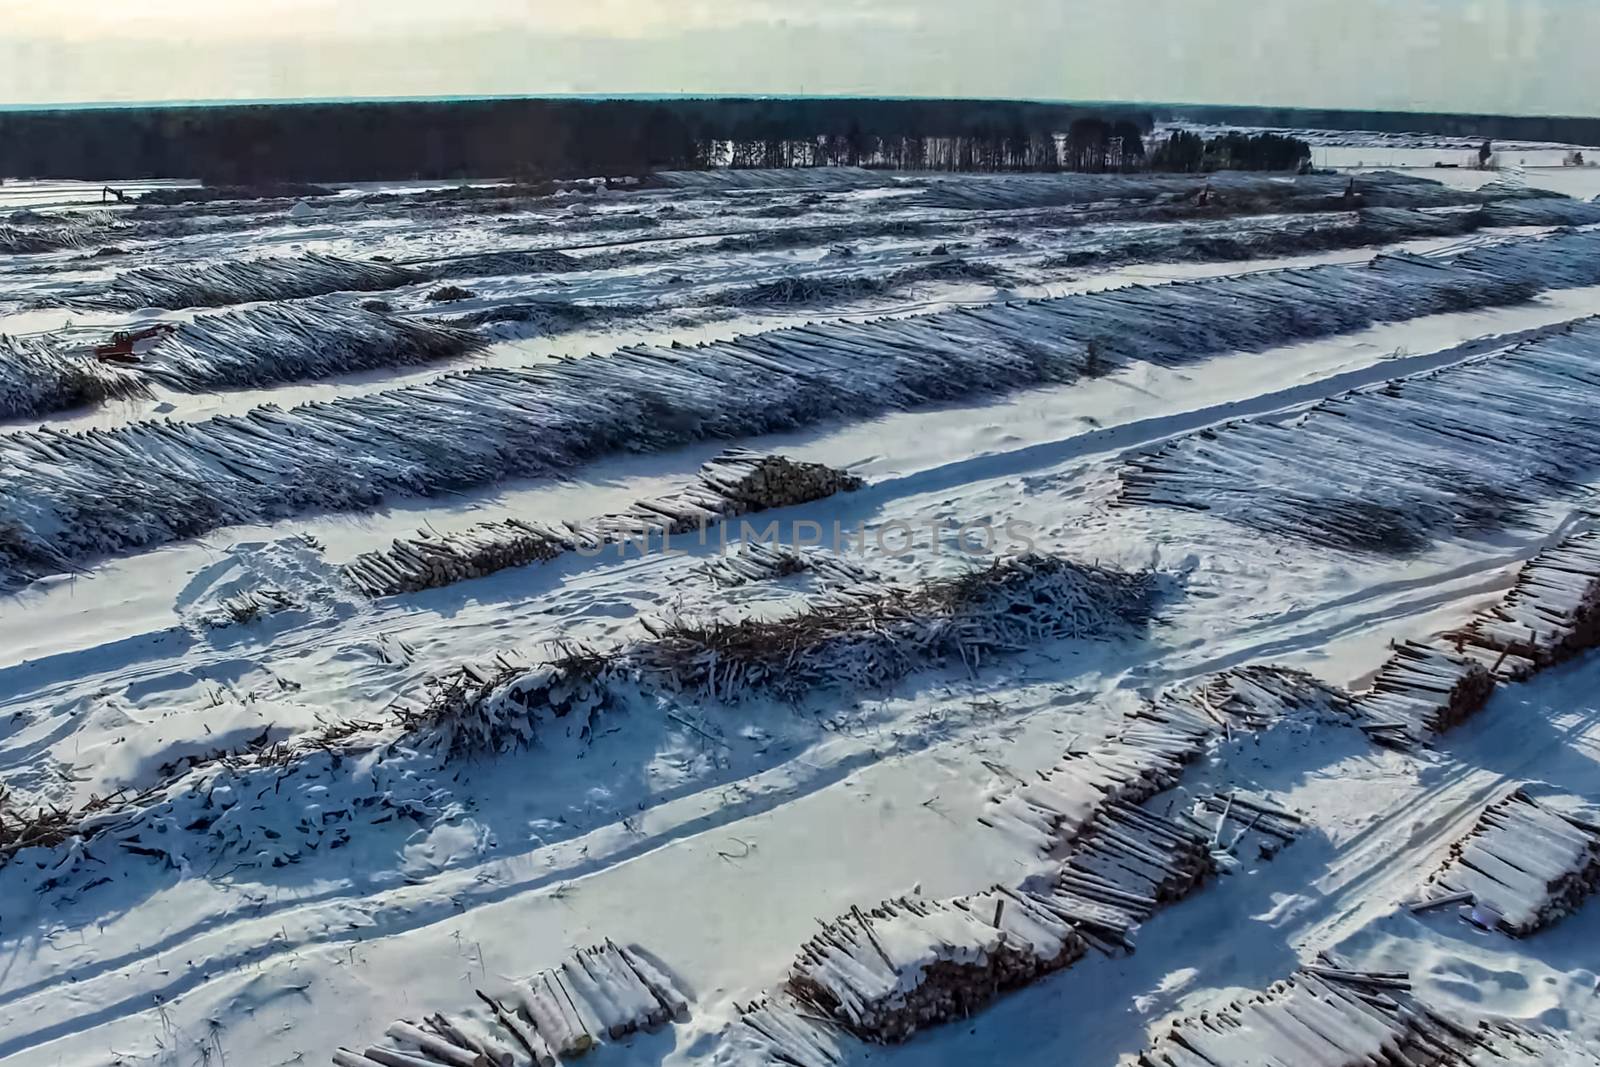 The felled trees lie under the open sky. Deforestation in Russia by nyrok